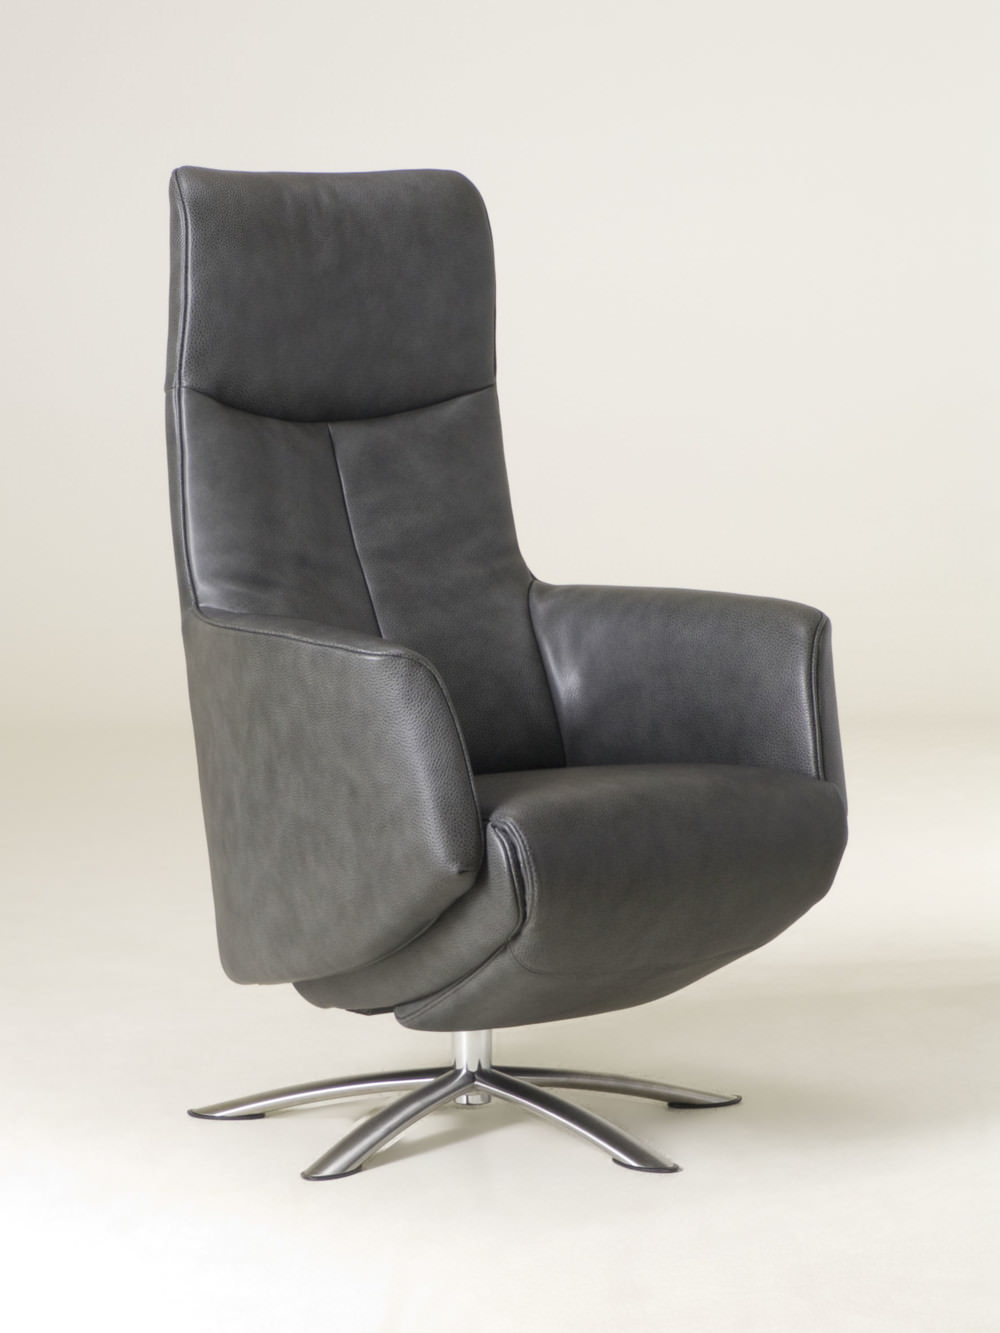 Relaxfauteuil Twice 082